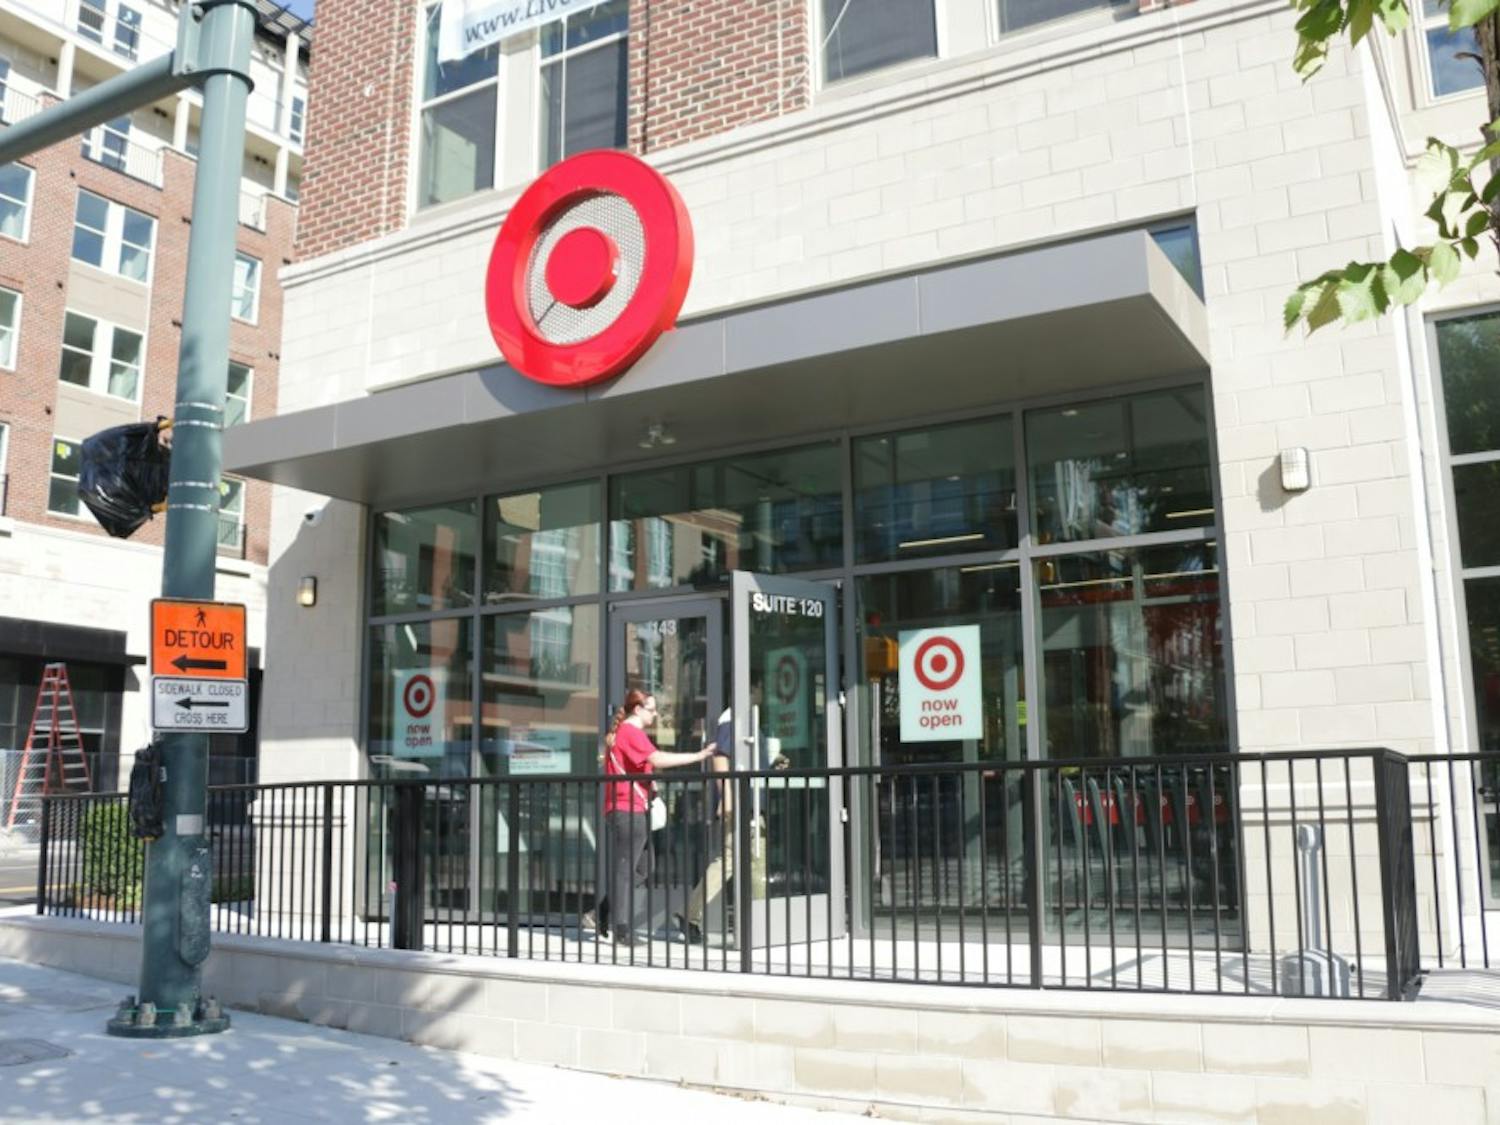 The Target in Carolina Square opened in July.